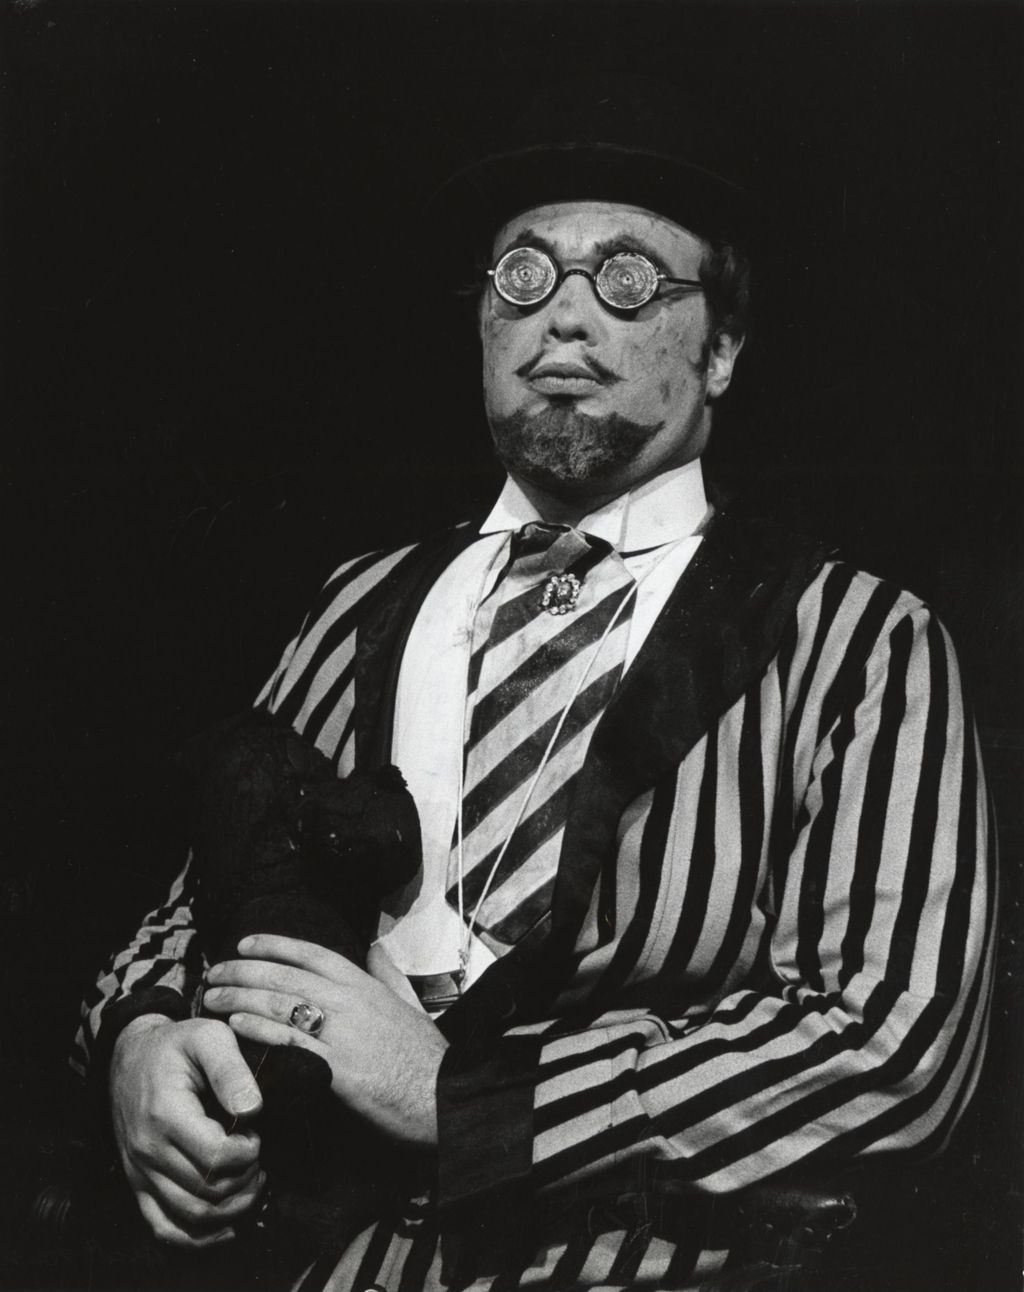 Unidentified actor in loud striped suit on stage in a production of "The Threepenny Opera" at Hull-House Theater